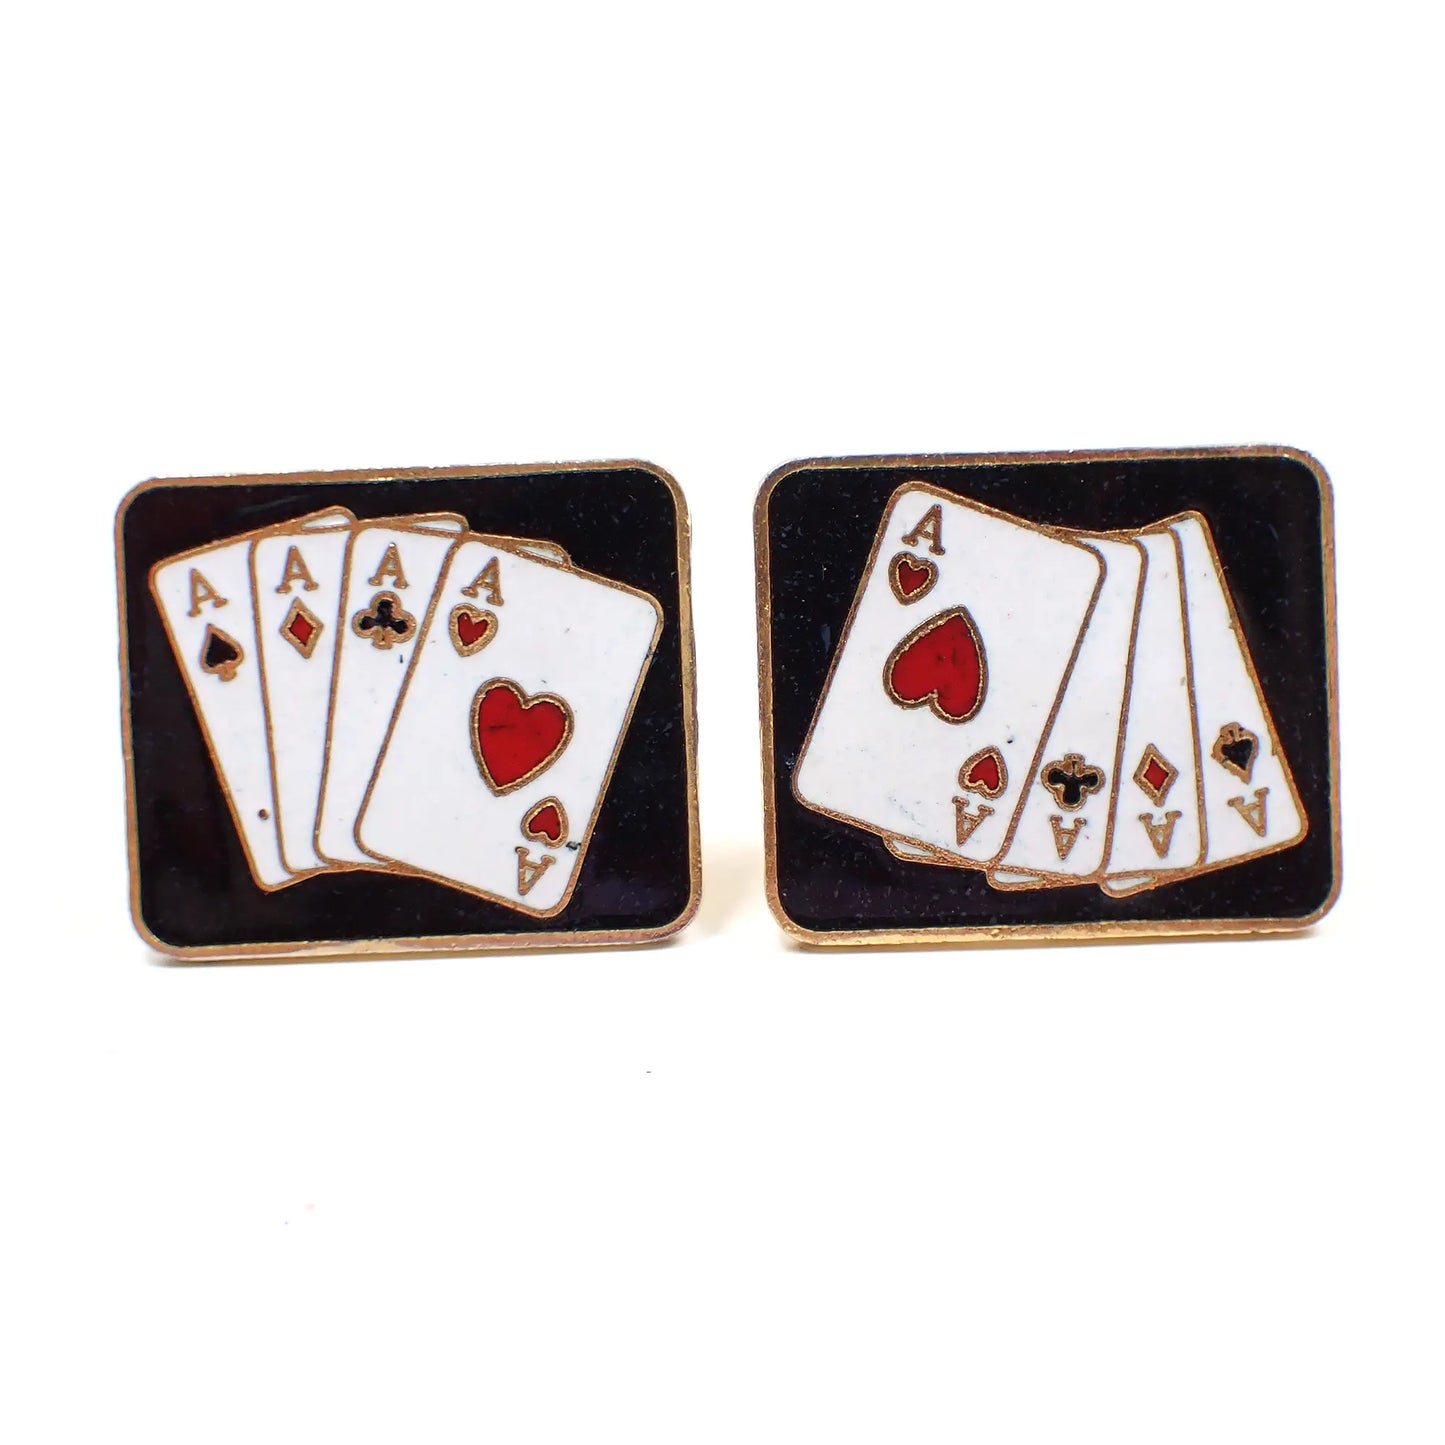 Black and White Enameled 4 of a Kind Playing Cards Aces Vintage Cufflinks, Poker Player Cuff Links